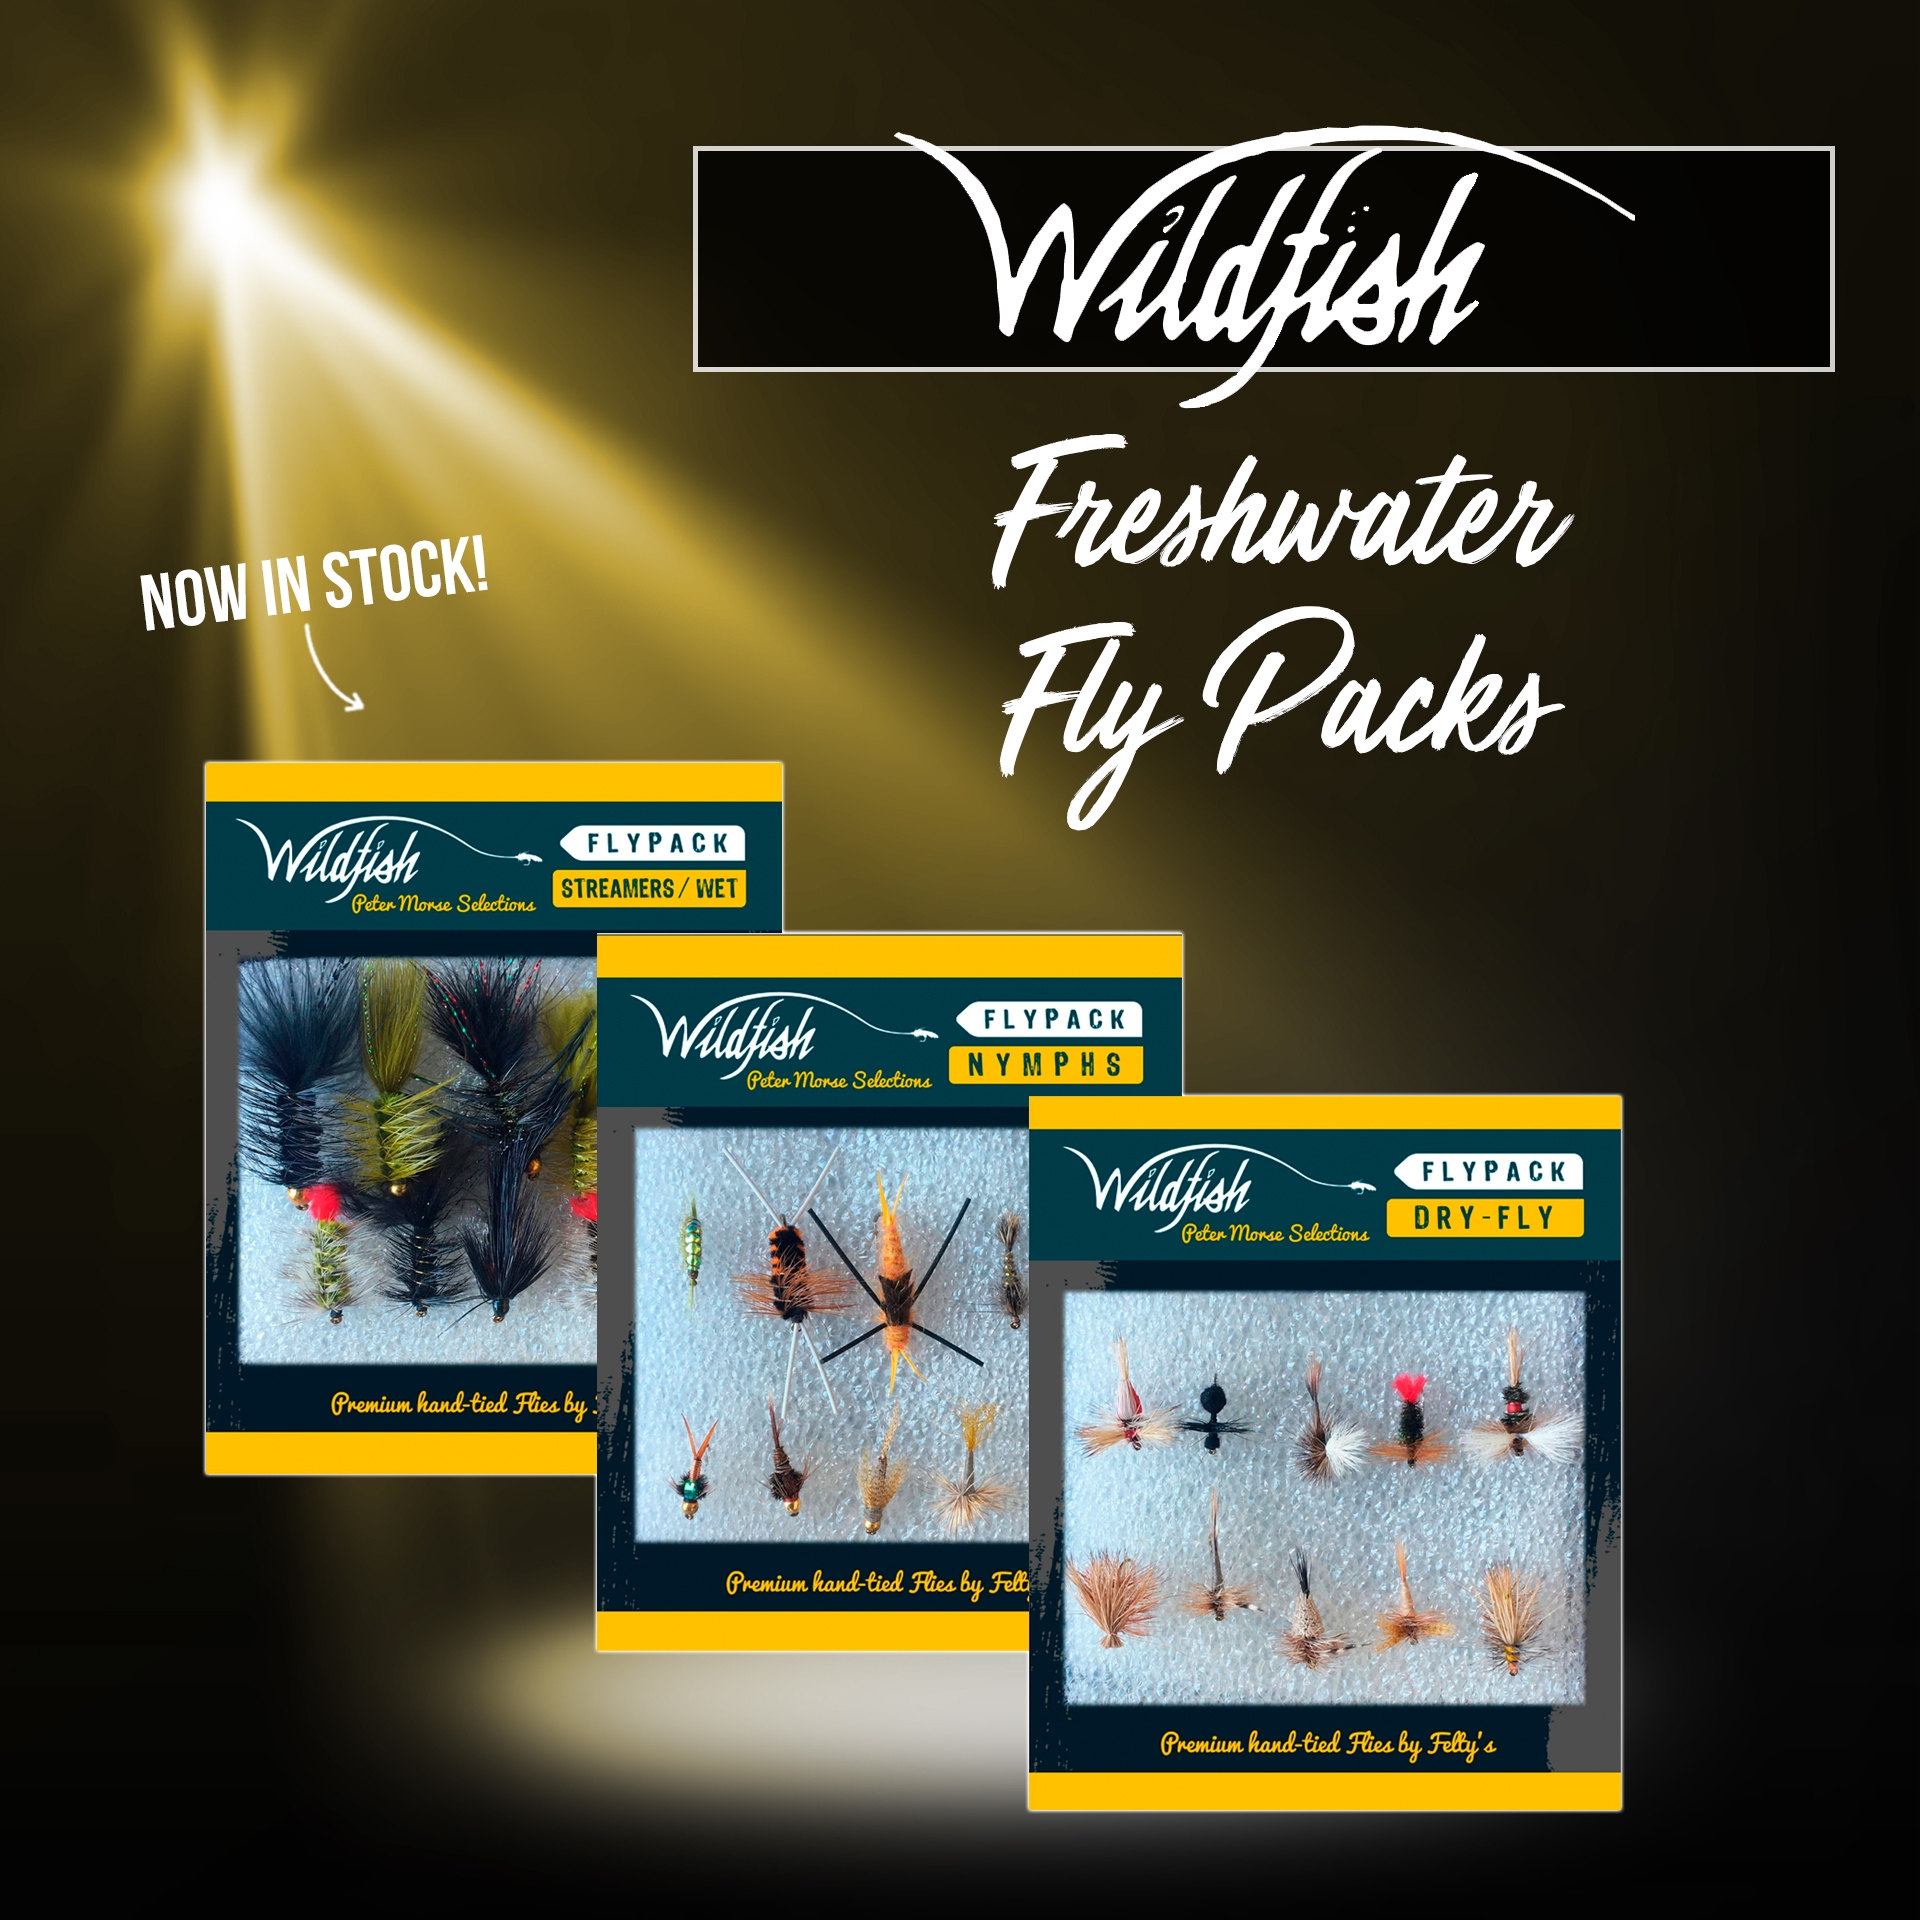 New - WILDFISH FRESHWATER FLY PACK